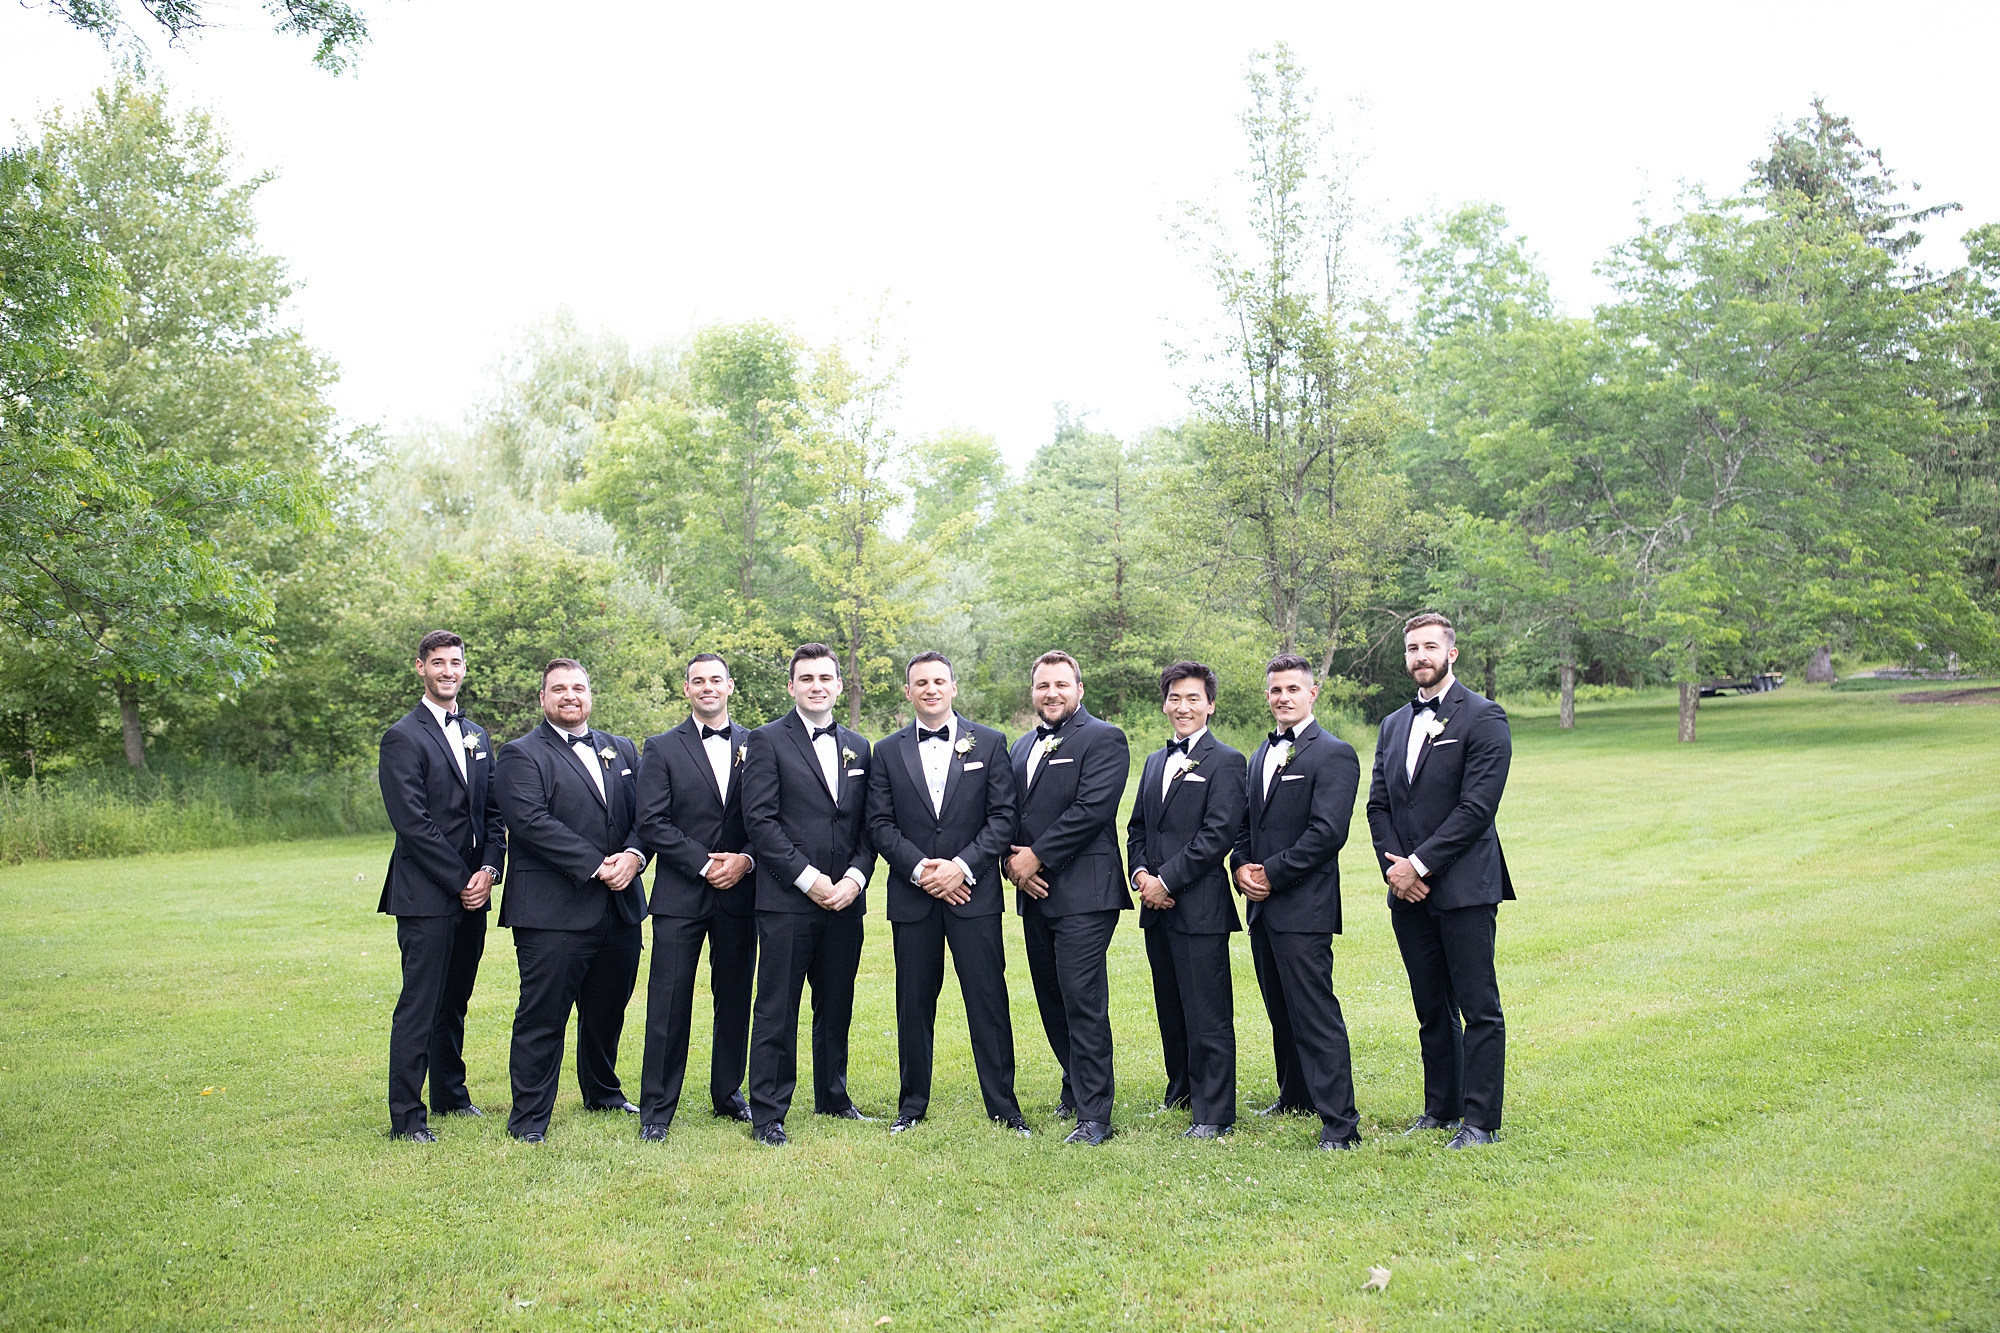 groom stands with groomsmen in classic tuxes at Crossed Keys Estate